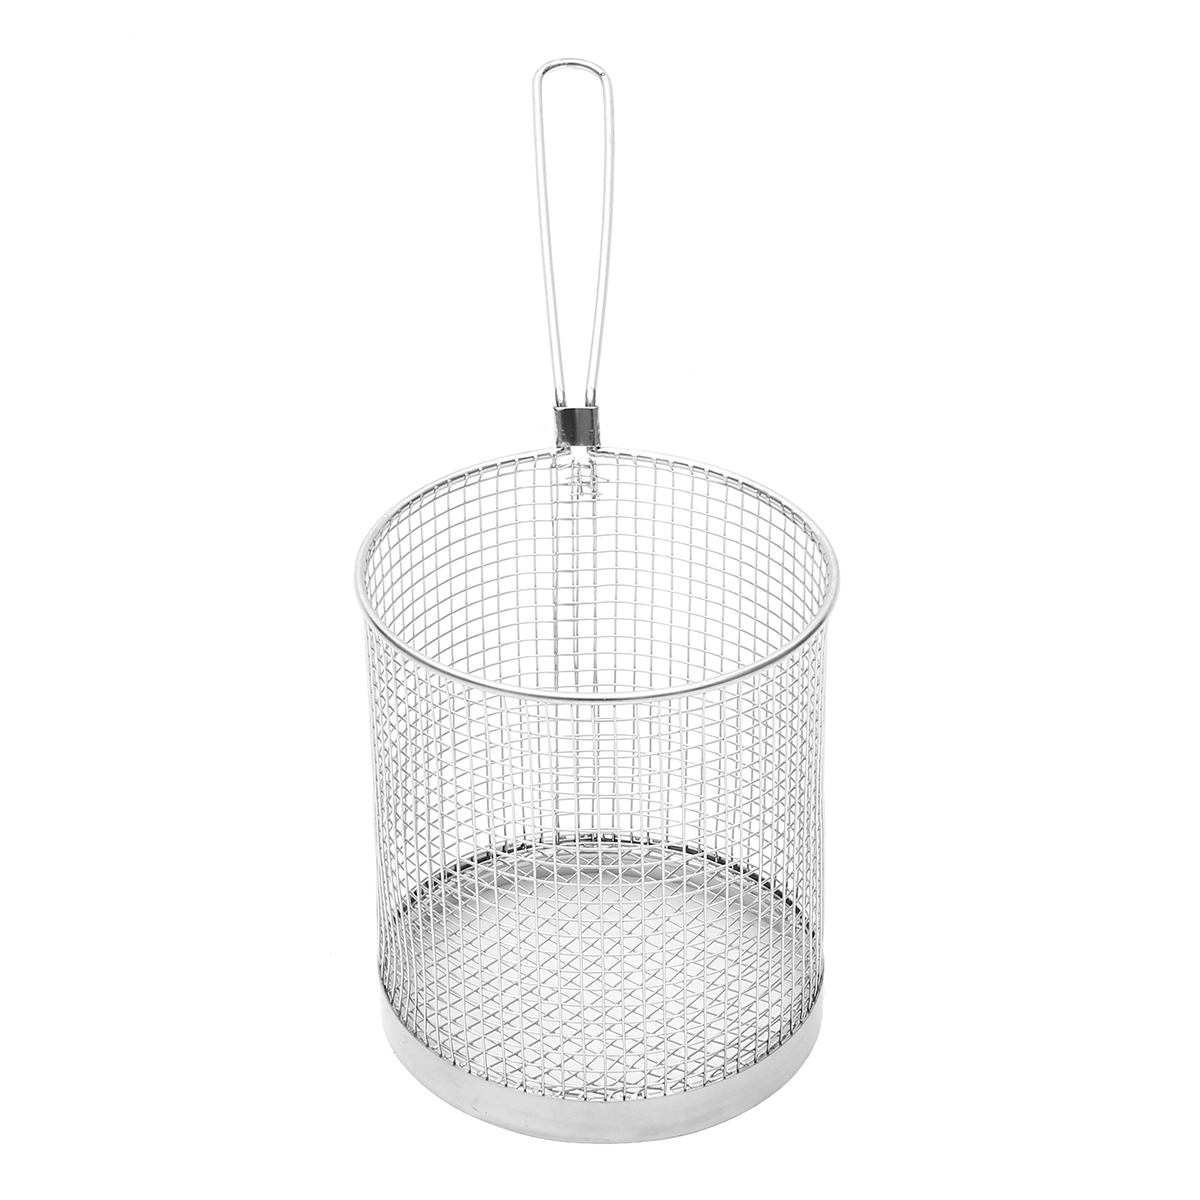 Stainless-Steel-Round-Fry-Basket-Long-Handle-Fried-Scampi-Chips-Chicken-Fryer-Strainer-1229014